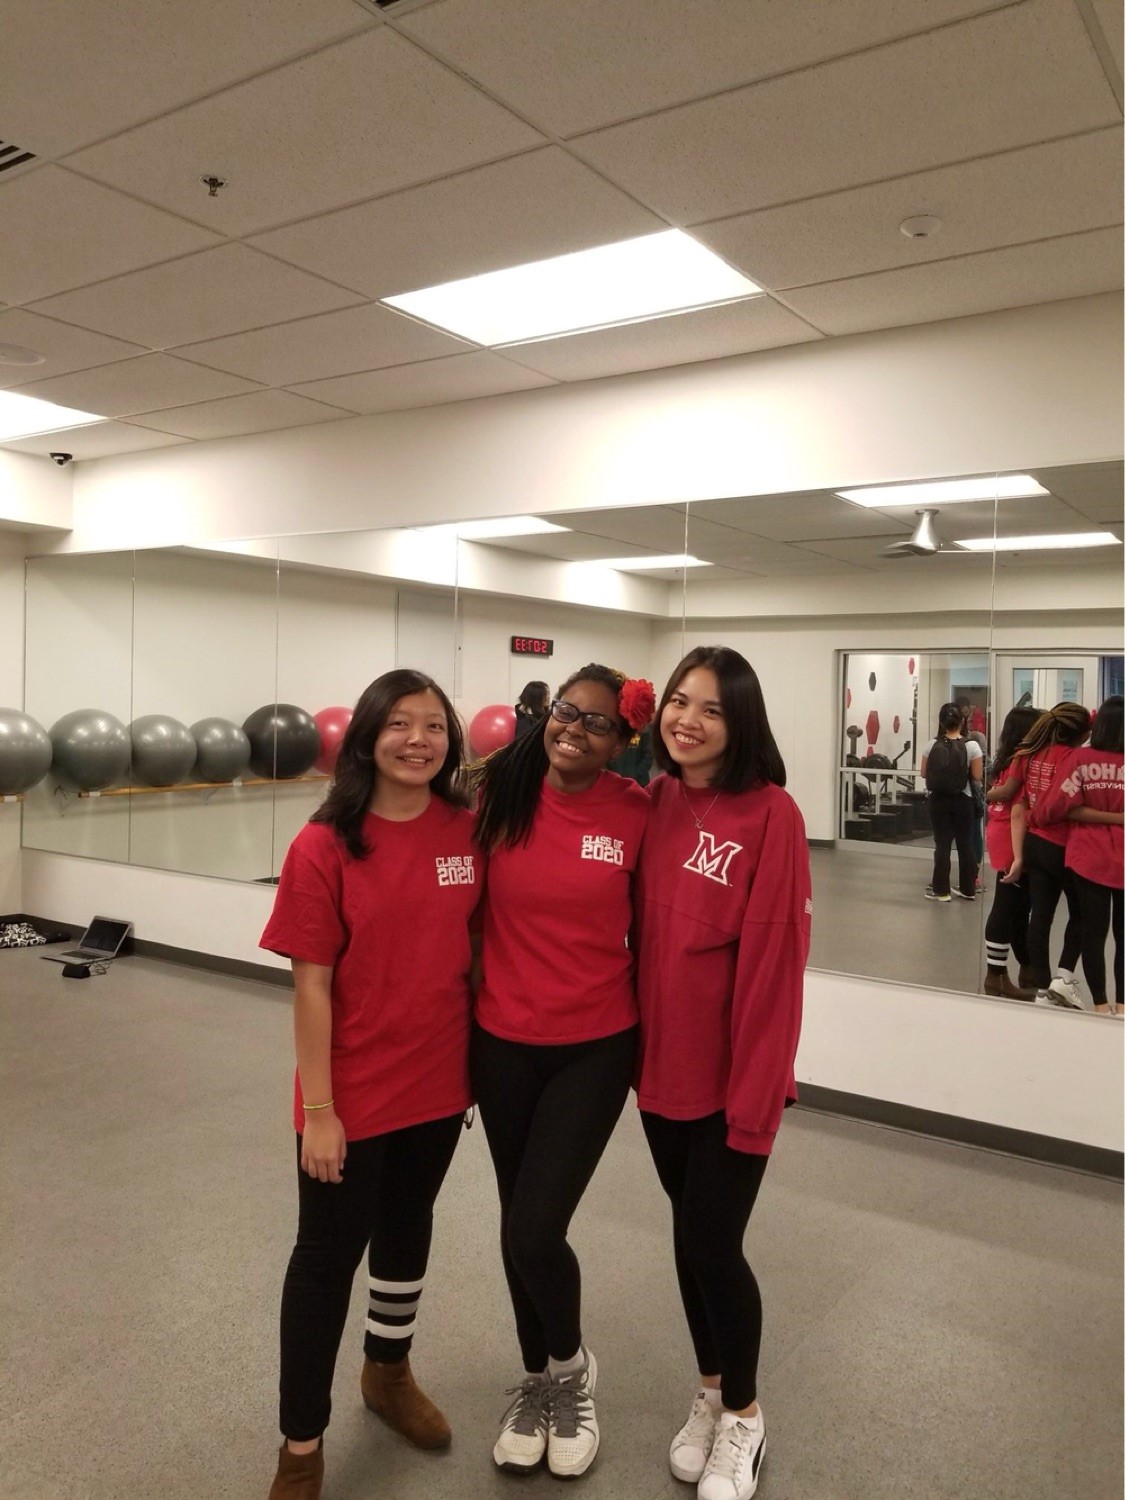 Three friends pose in Miami gear in an exercise class.